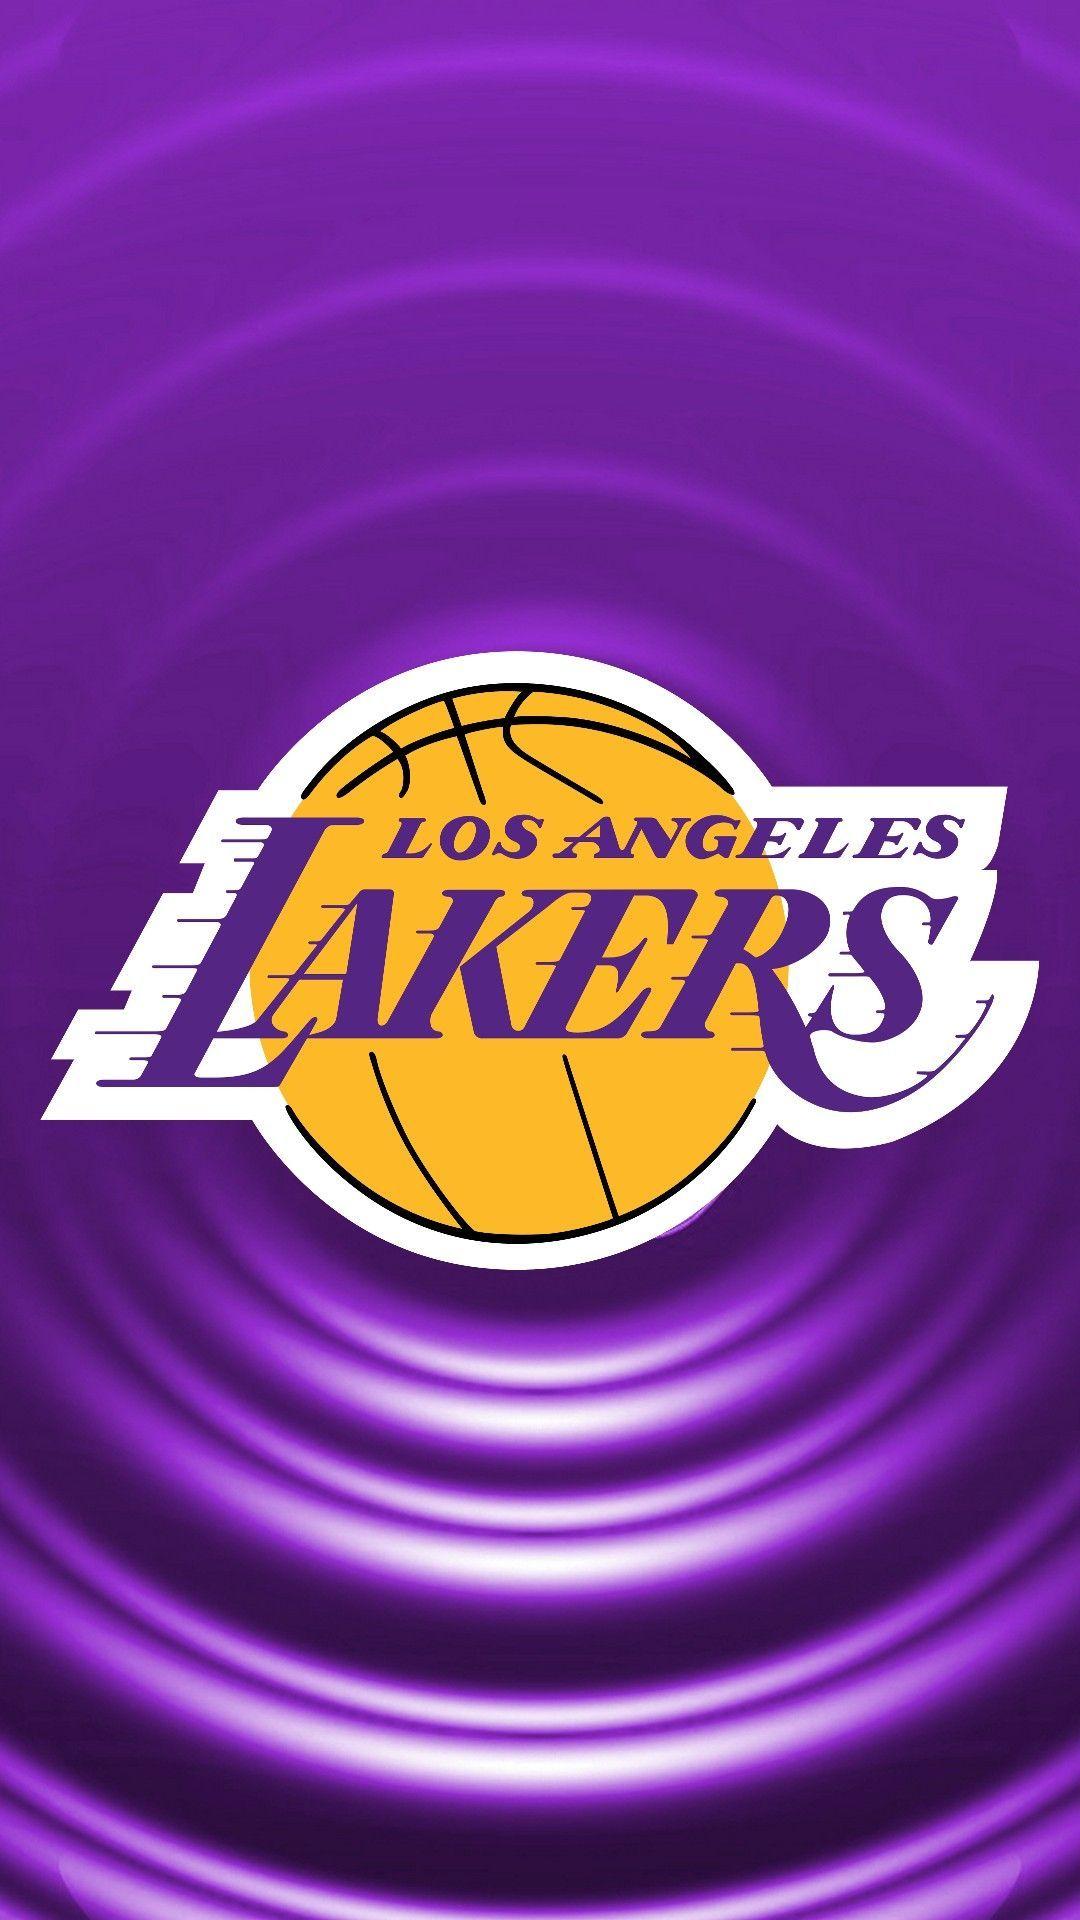 Aggregate 64+ los angeles lakers wallpaper best - in.cdgdbentre